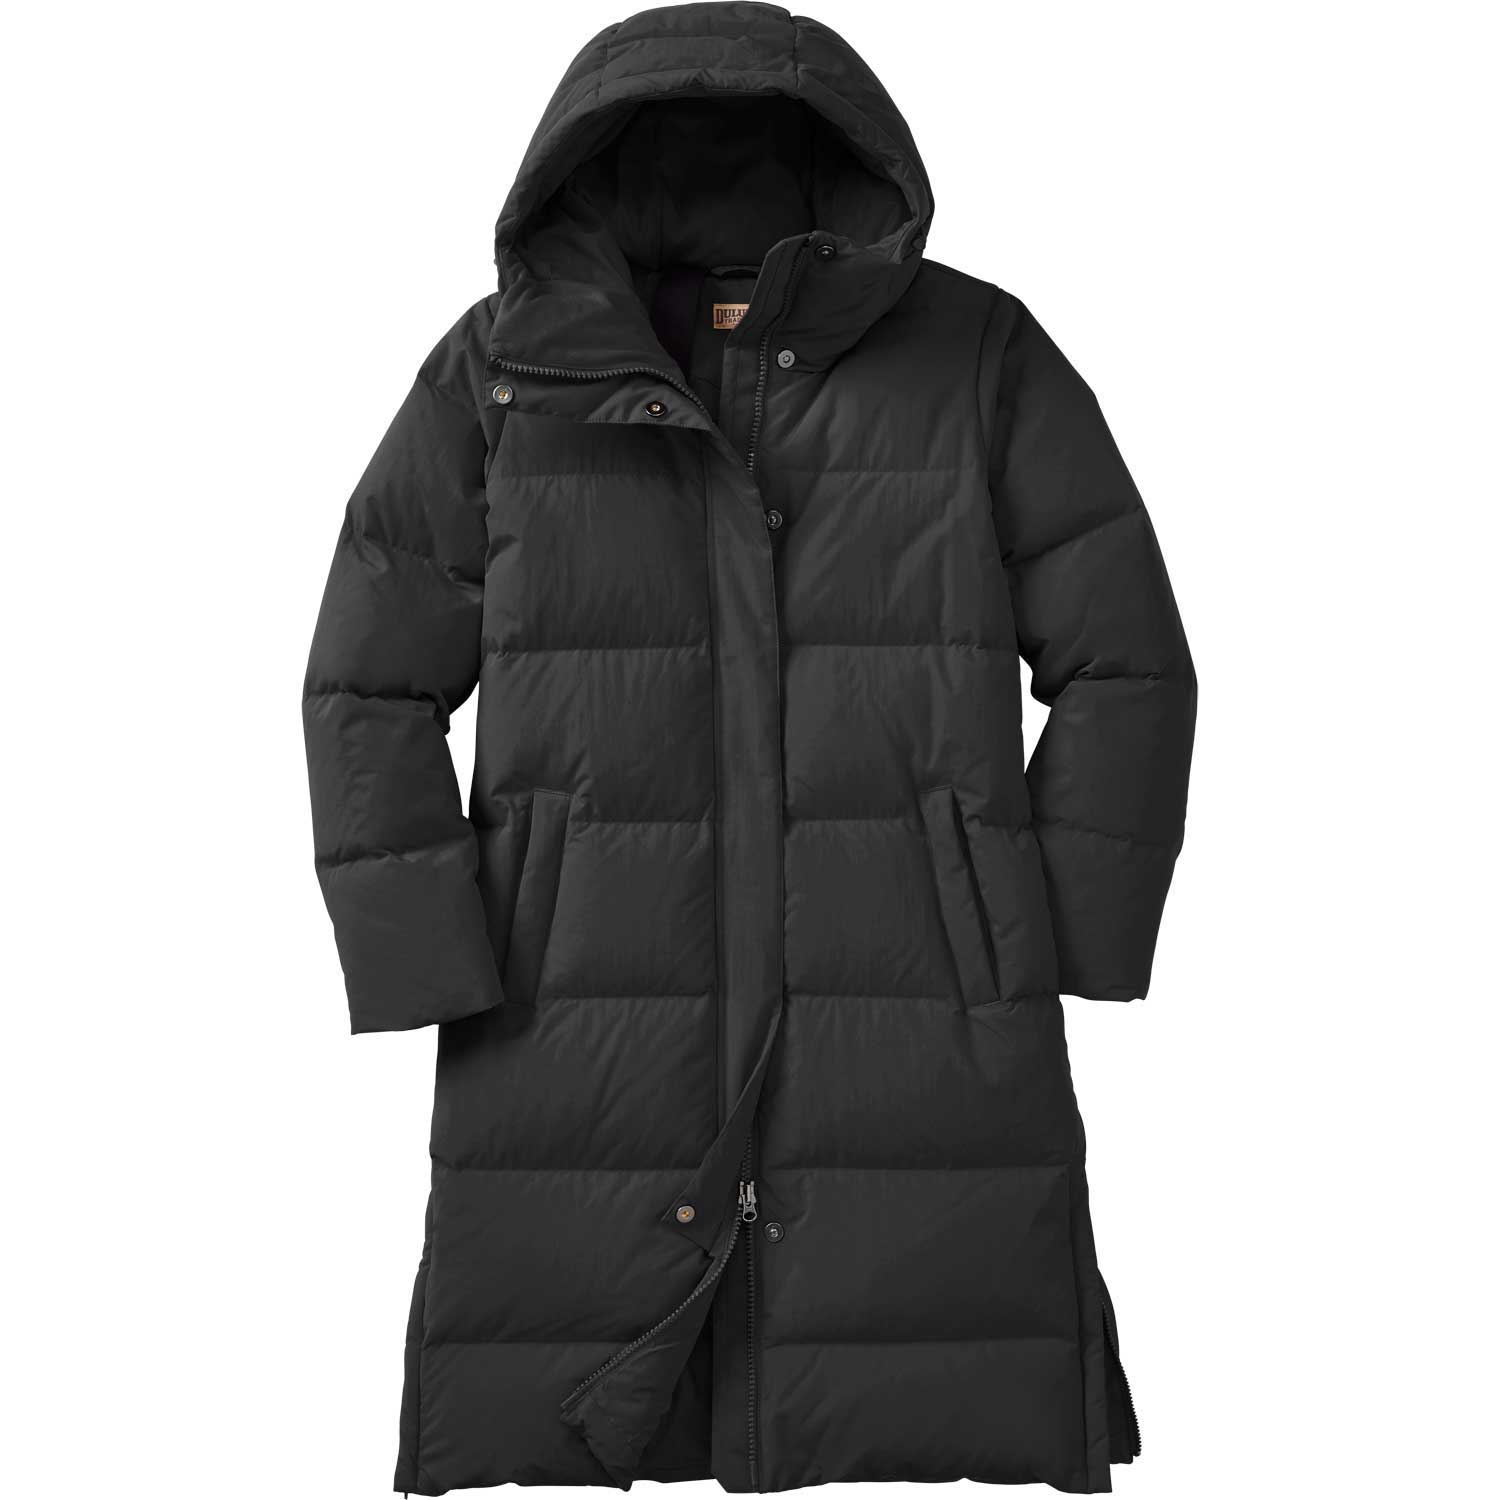 Duluth Trading Co. Men's No-Rainer Long Coat | CoolSprings Galleria